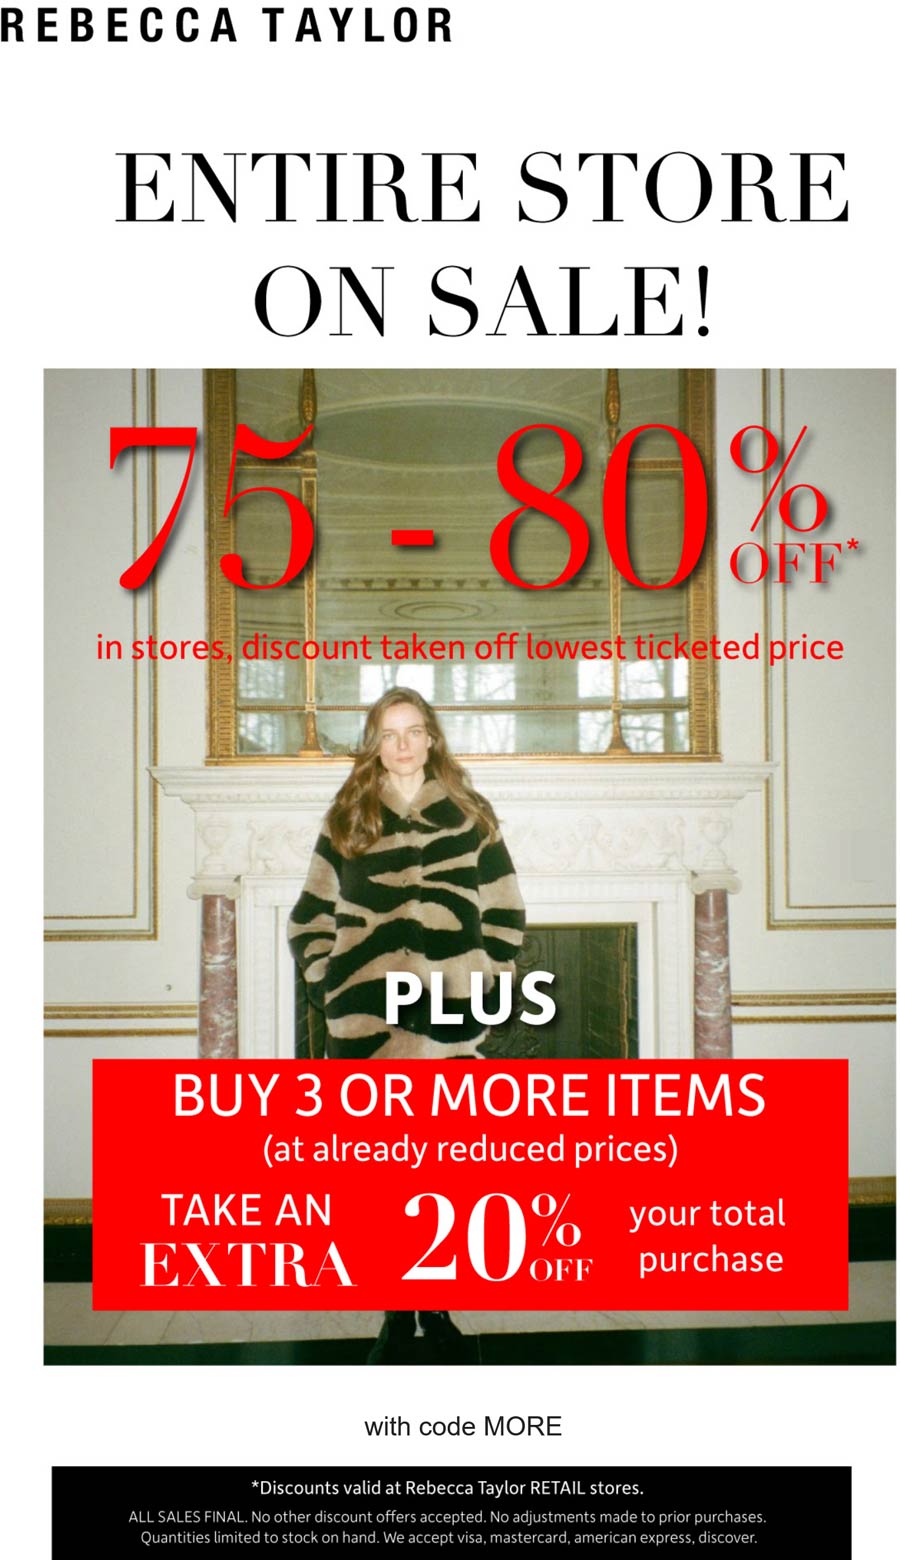 Rebecca Taylor stores Coupon  Everything 75-95% off at Rebecca Taylor, or online via promo code MORE #rebeccataylor 